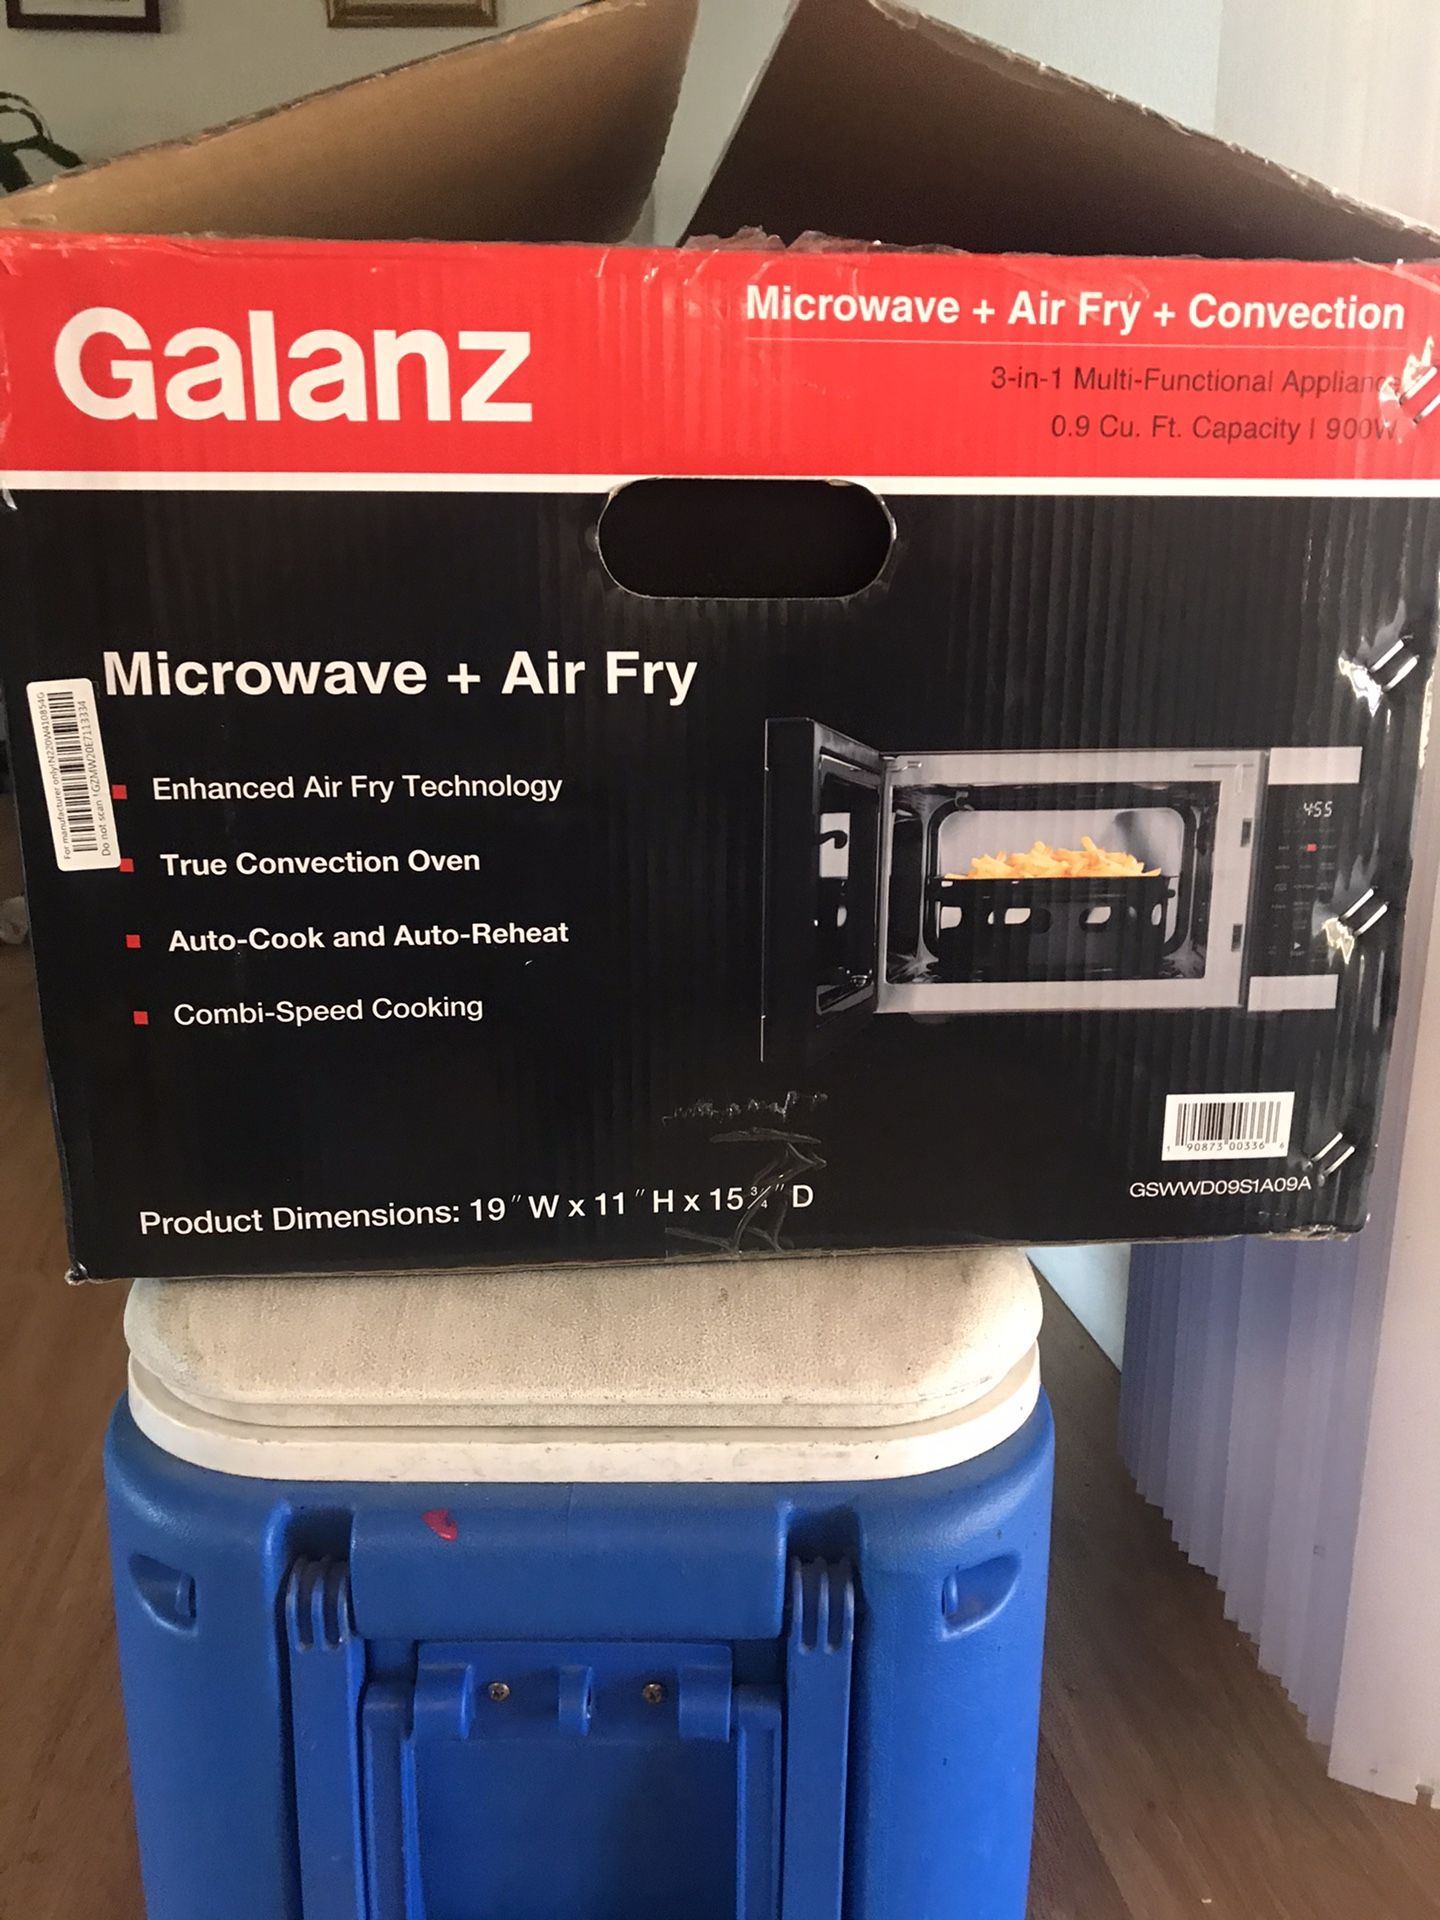 GSWWD09S1A09A by Galanz - Galanz 0.9 Cu Ft Air Fry Microwave Oven